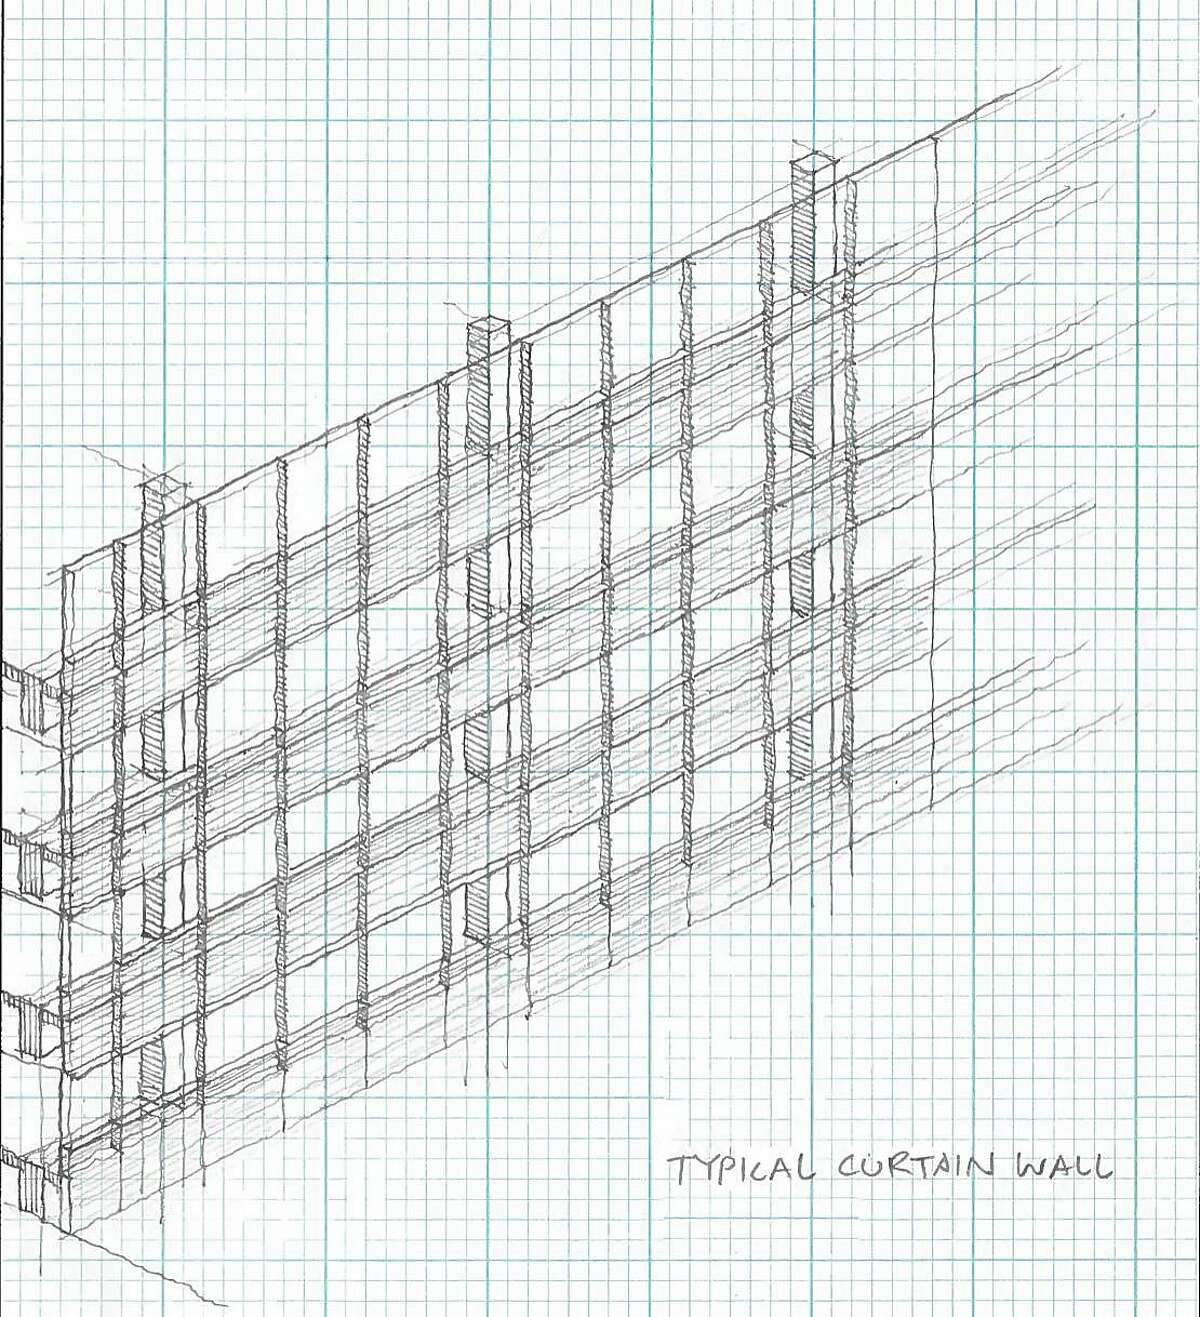 A structural diagram by John Neary, a facade specialist at the architecture firm HOK, showing a typical curtain wall, and how it is attached to a tower.